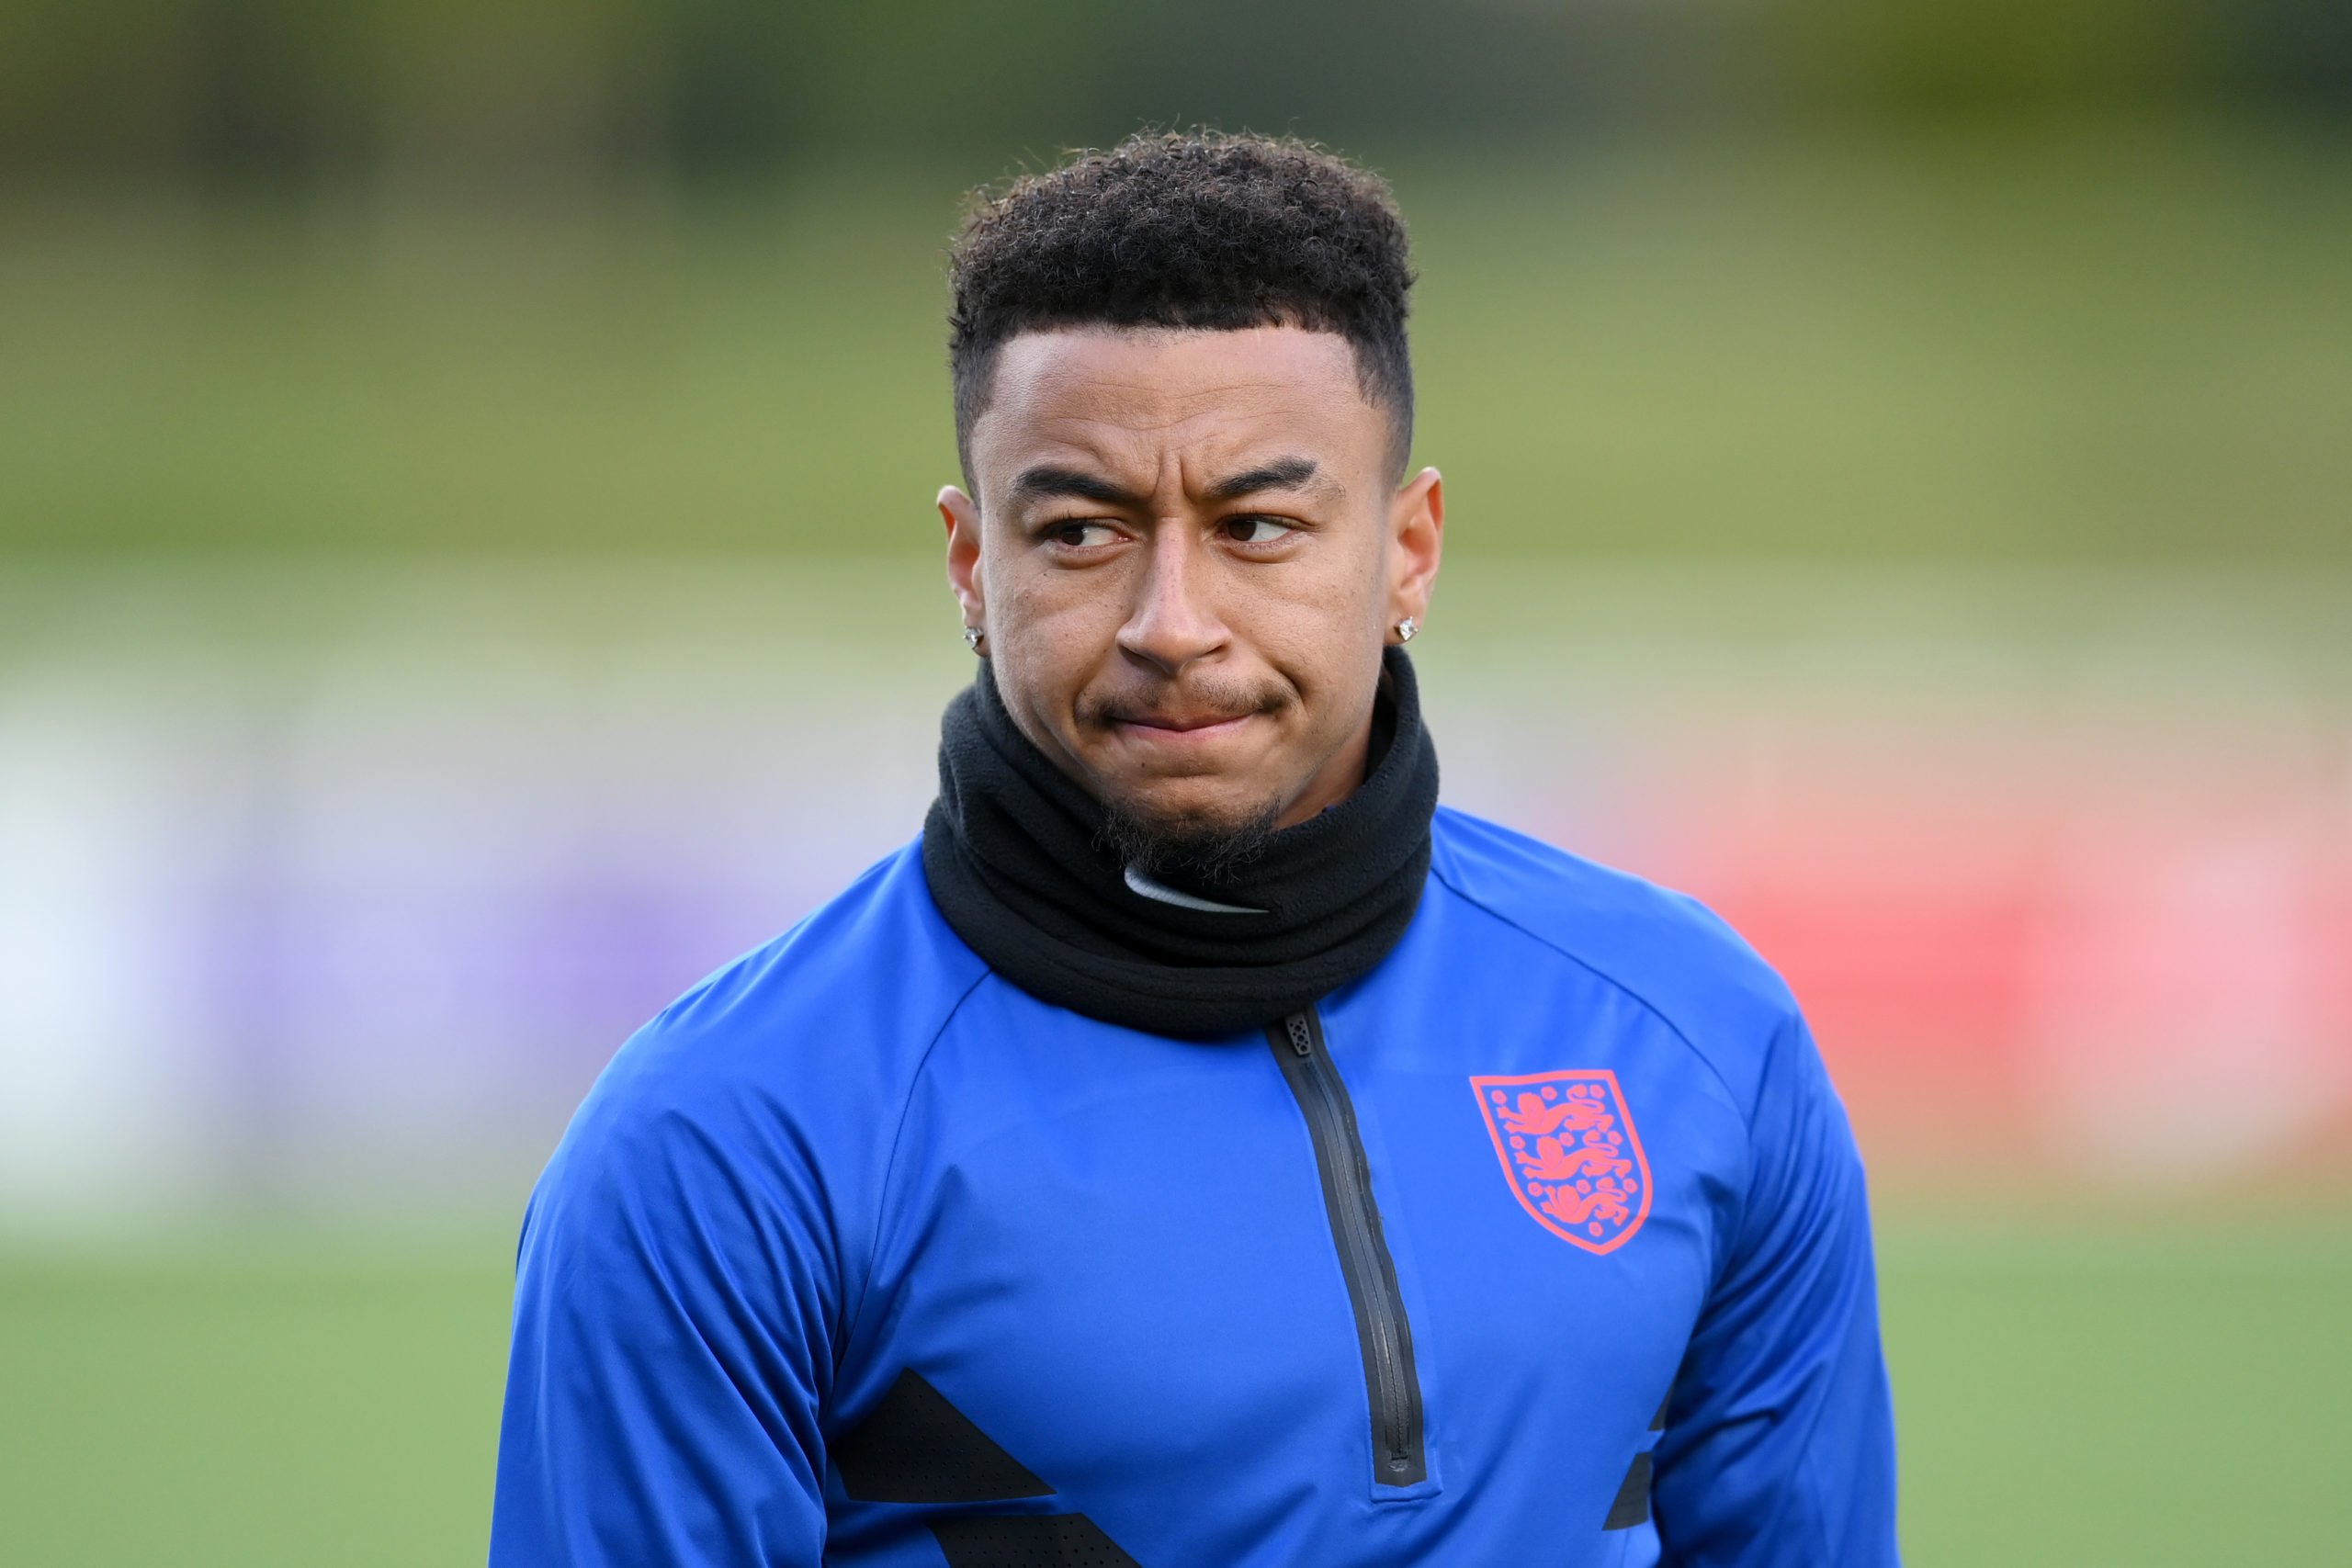 Barcelona are in pole position to sign Jesse Lingard - What does the future hold for him?